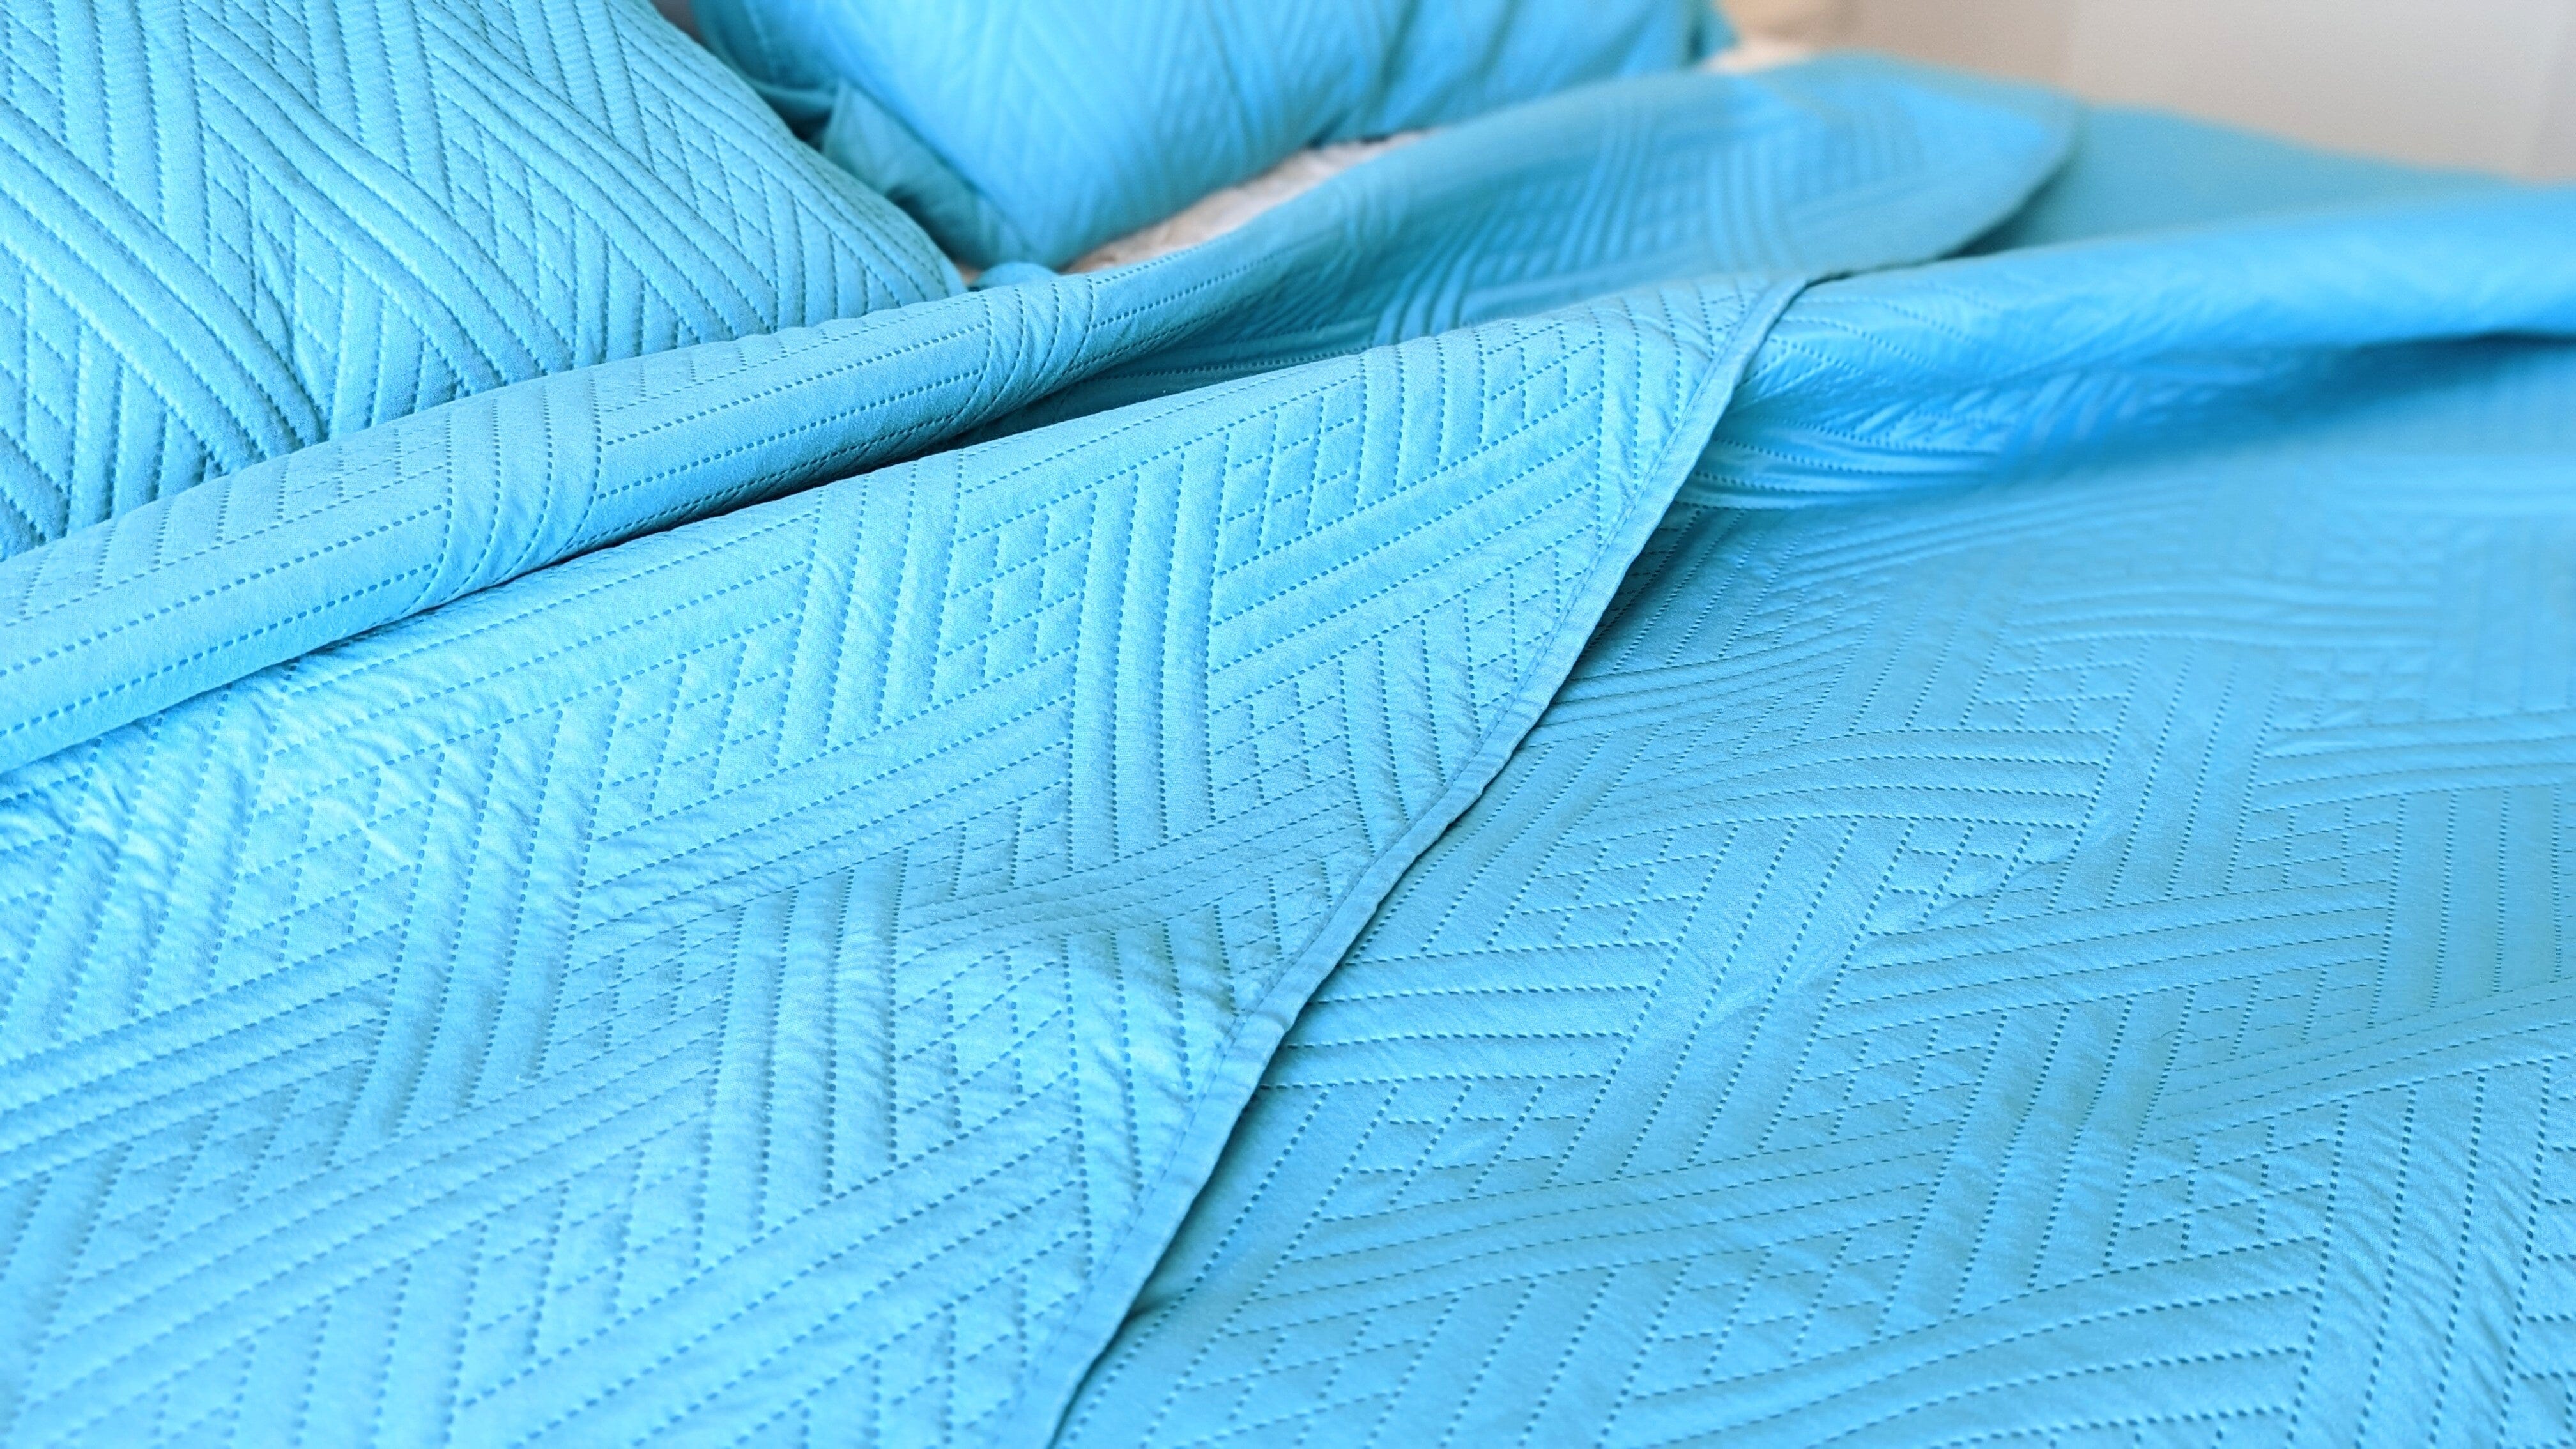 DaDa Bedding Solid Gentle Wave Turquoise Teal Blue Thin & Lightweight ...